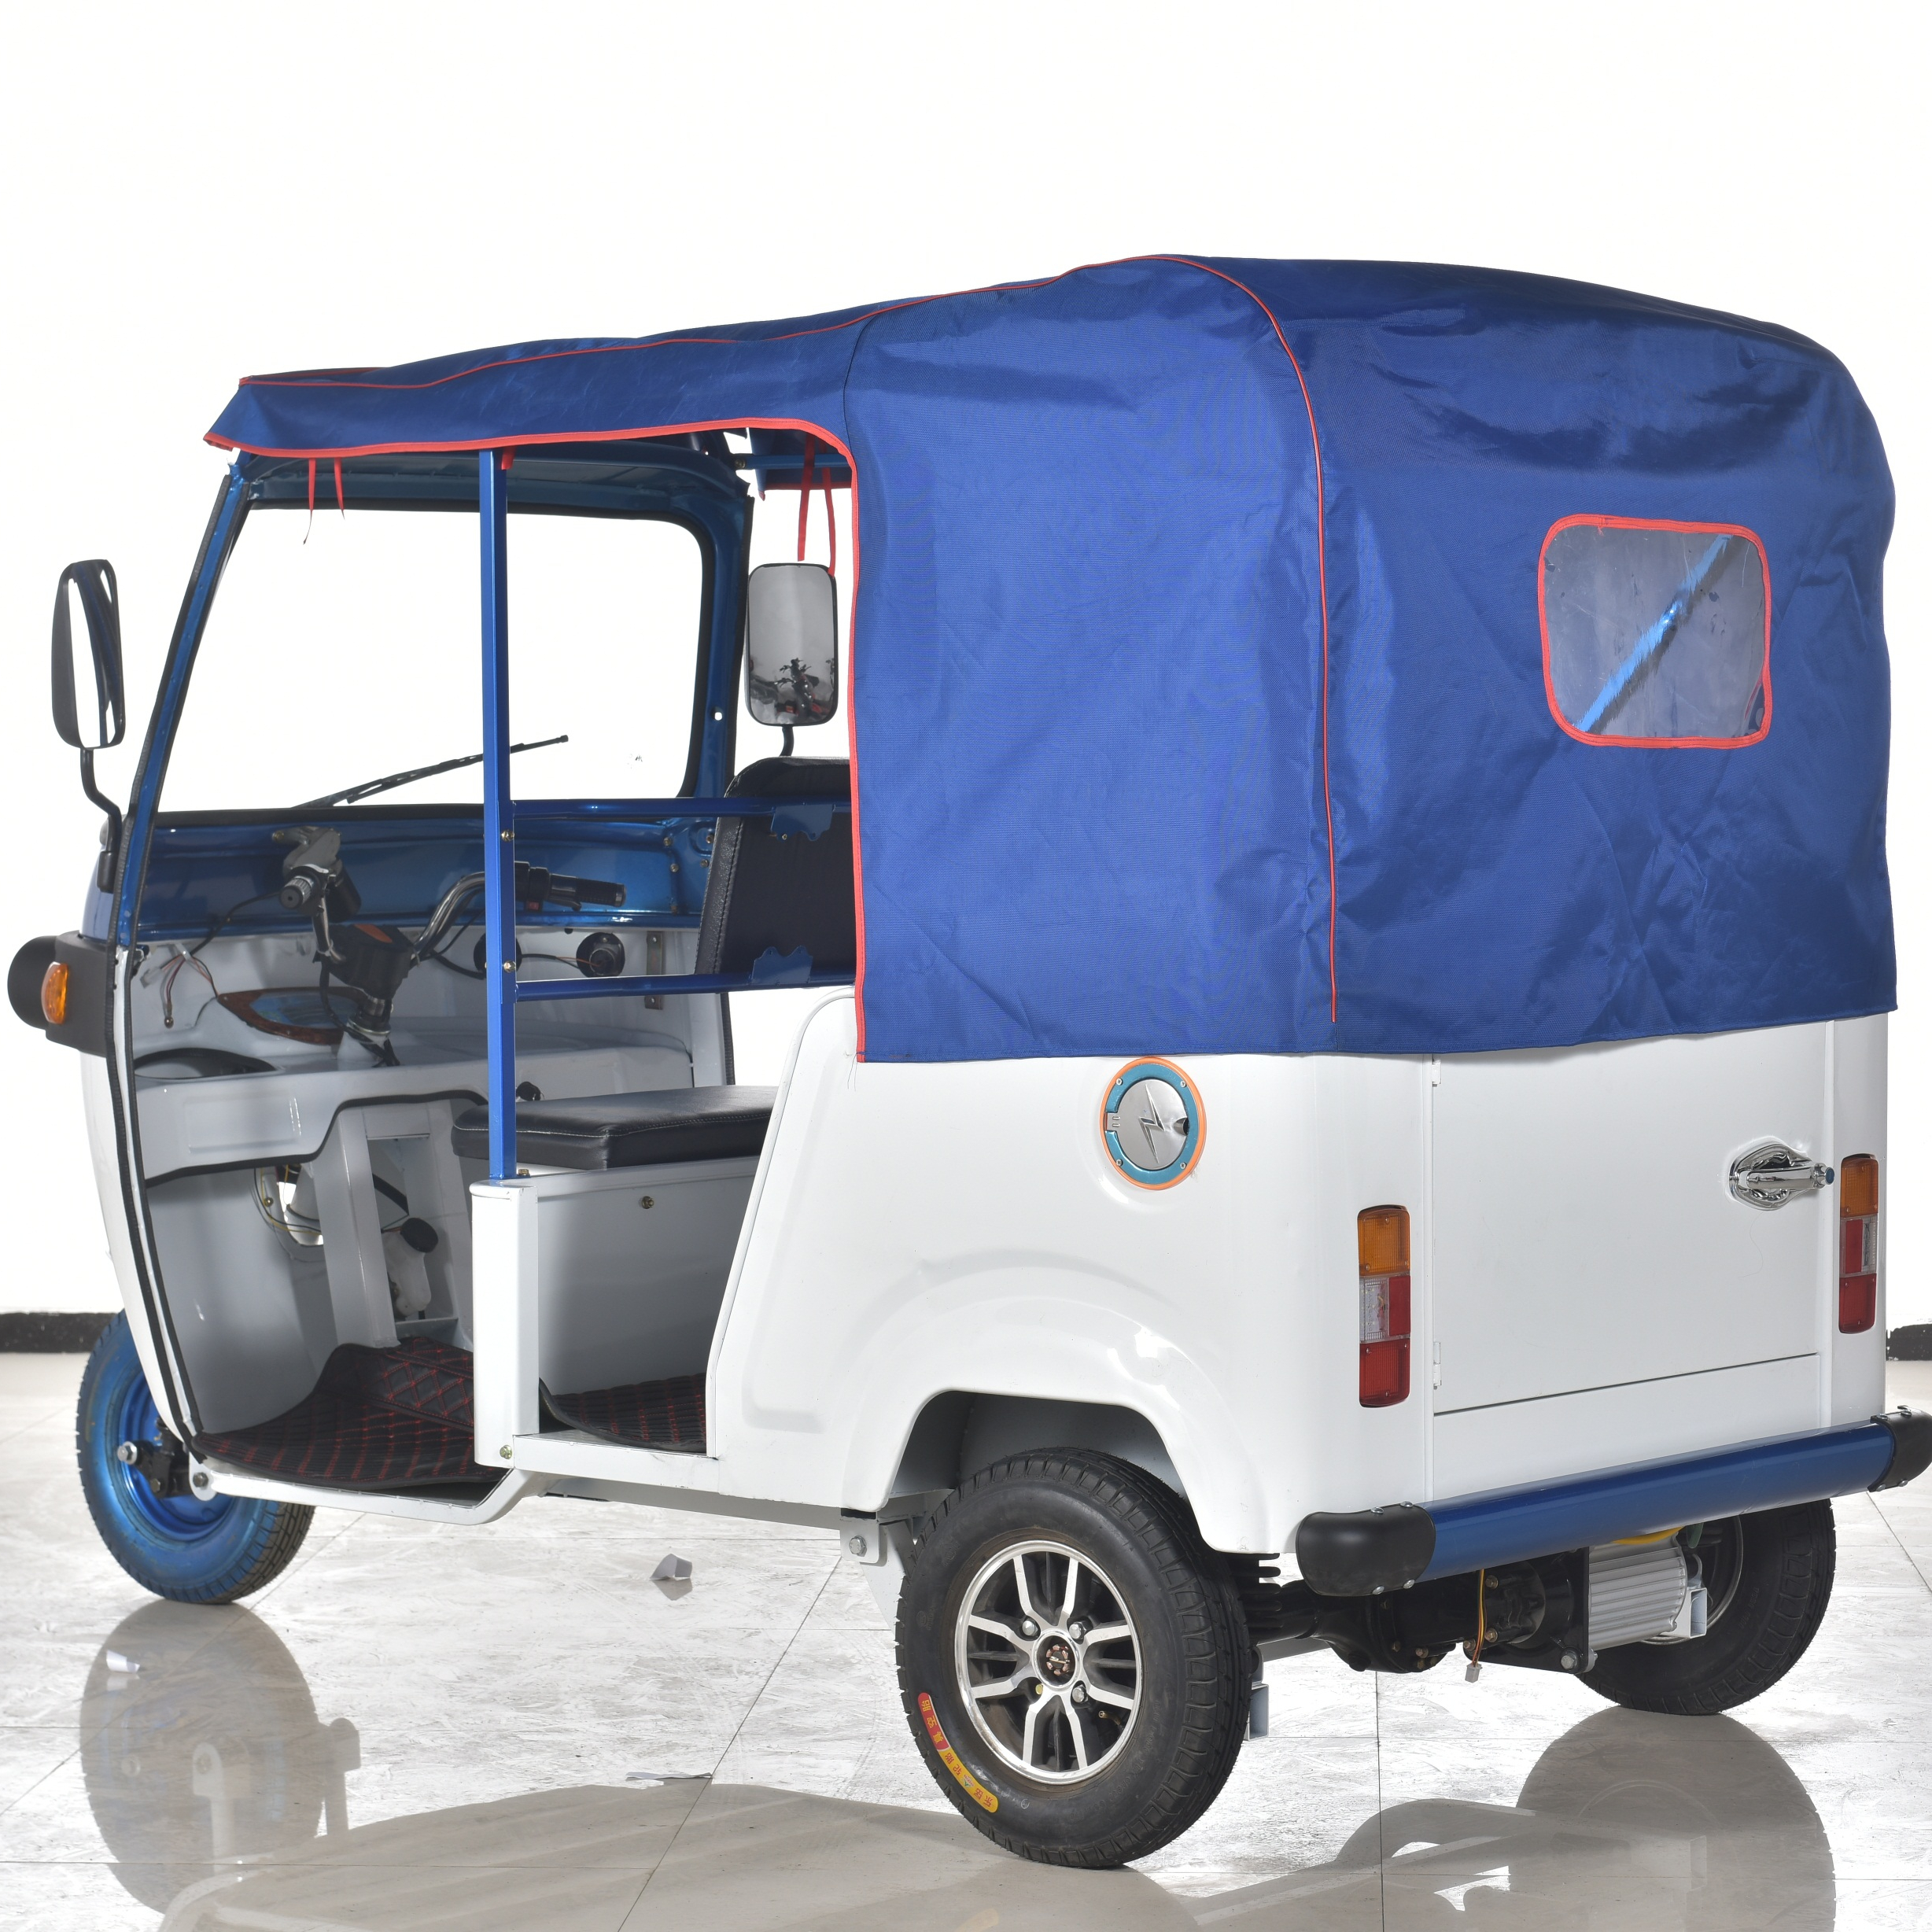 China Wholesale Electric Tricycles Wholesalers Pricelist - 2020  Spacious  Electric Tricycle  For Passenger  Cheaper Auto E  Rickshaw Price for sale – Qiangsheng